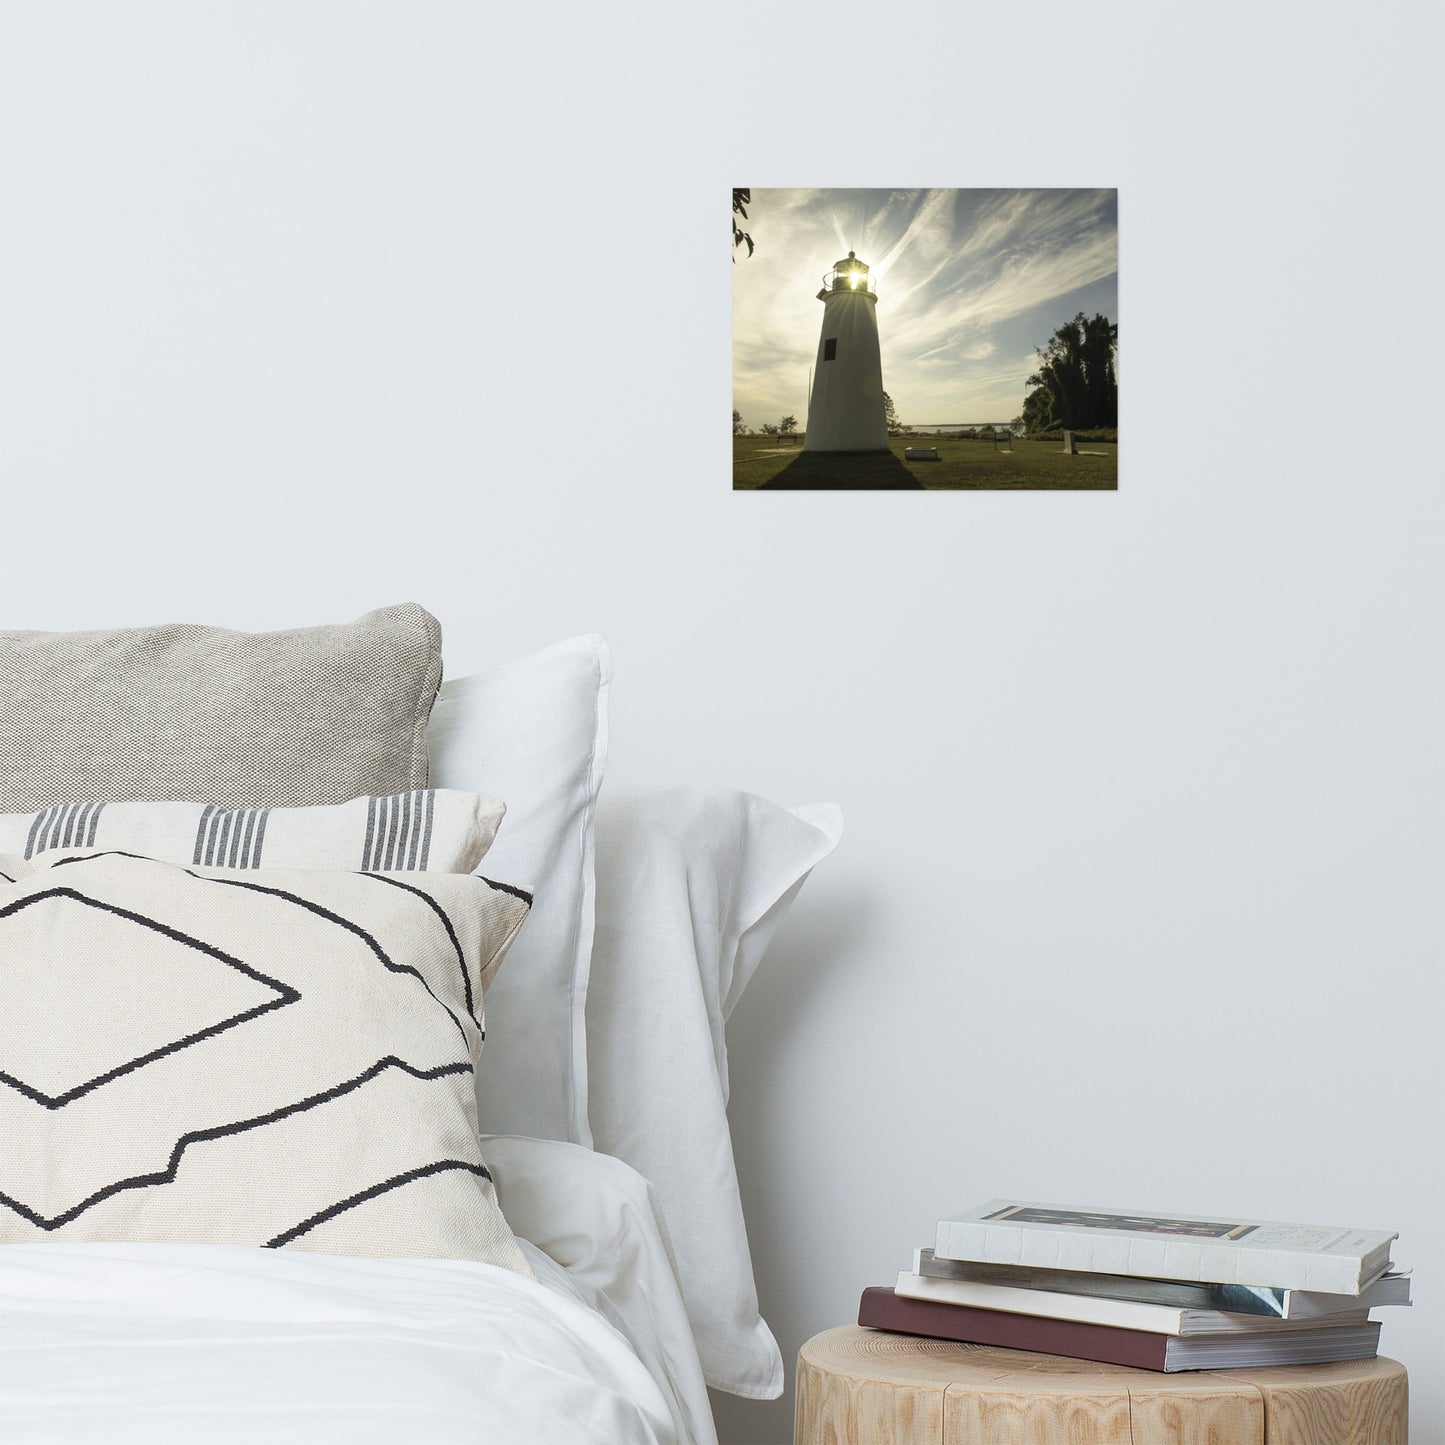 Turkey Point Lighthouse with Sun Flare Horizontal Loose Wall Art Prints